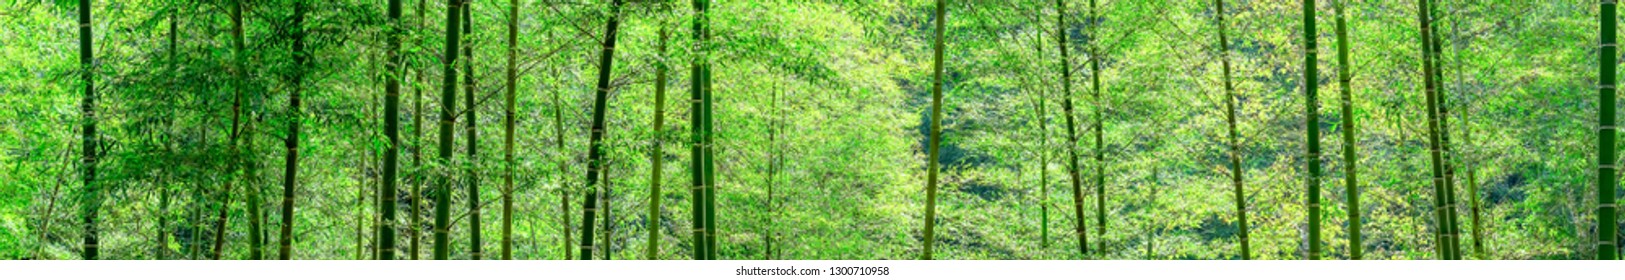 Bamboo Forest Decoration Background in the Afternoon Sunshine with Super-long Pictures.